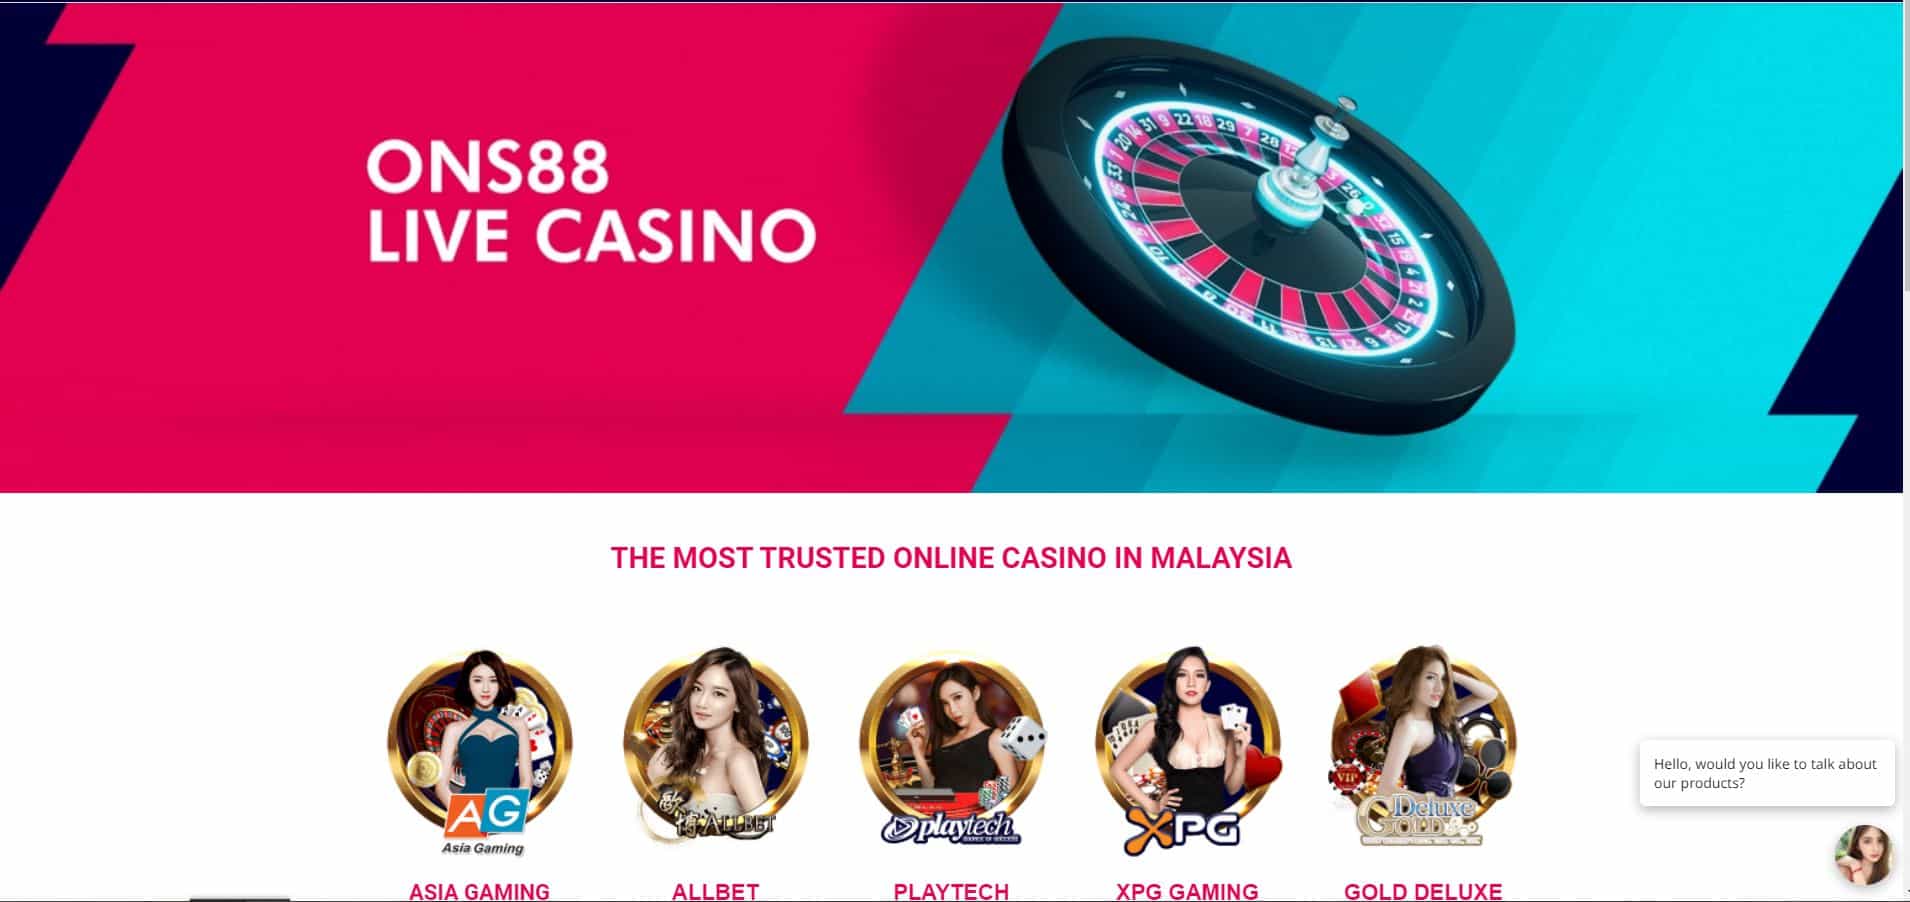 ons88-Available-Games-Live-Casino